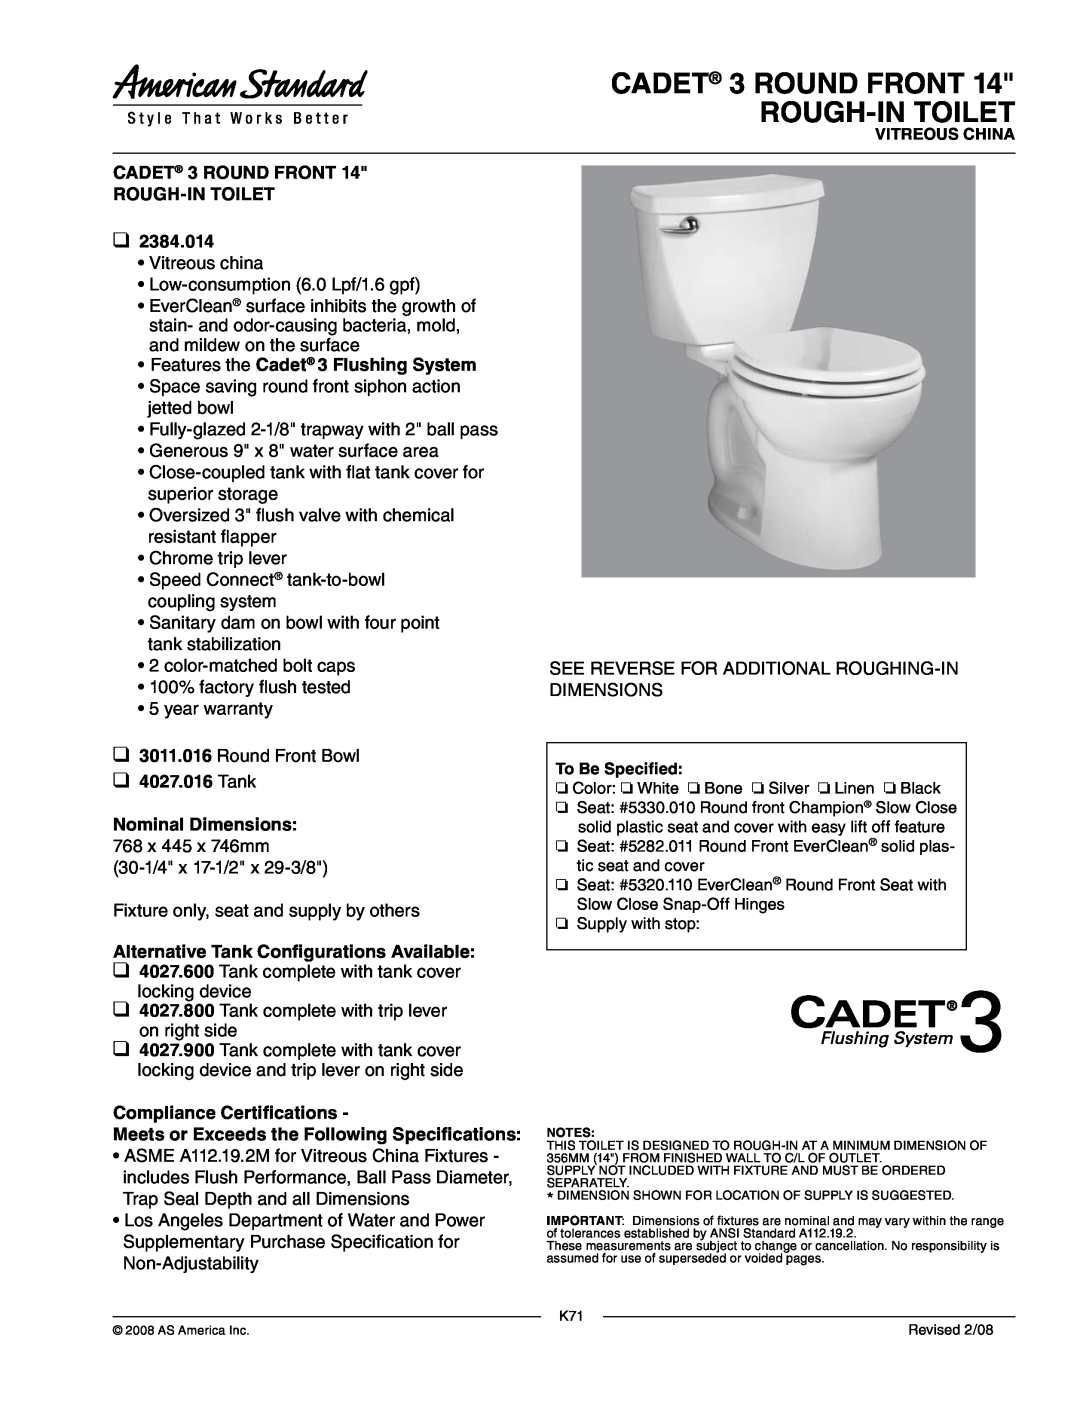 American Standard 2384.014 dimensions CADET 3 ROUND FRONT ROUGH-INTOILET, Features the Cadet 3 Flushing System, Tank 